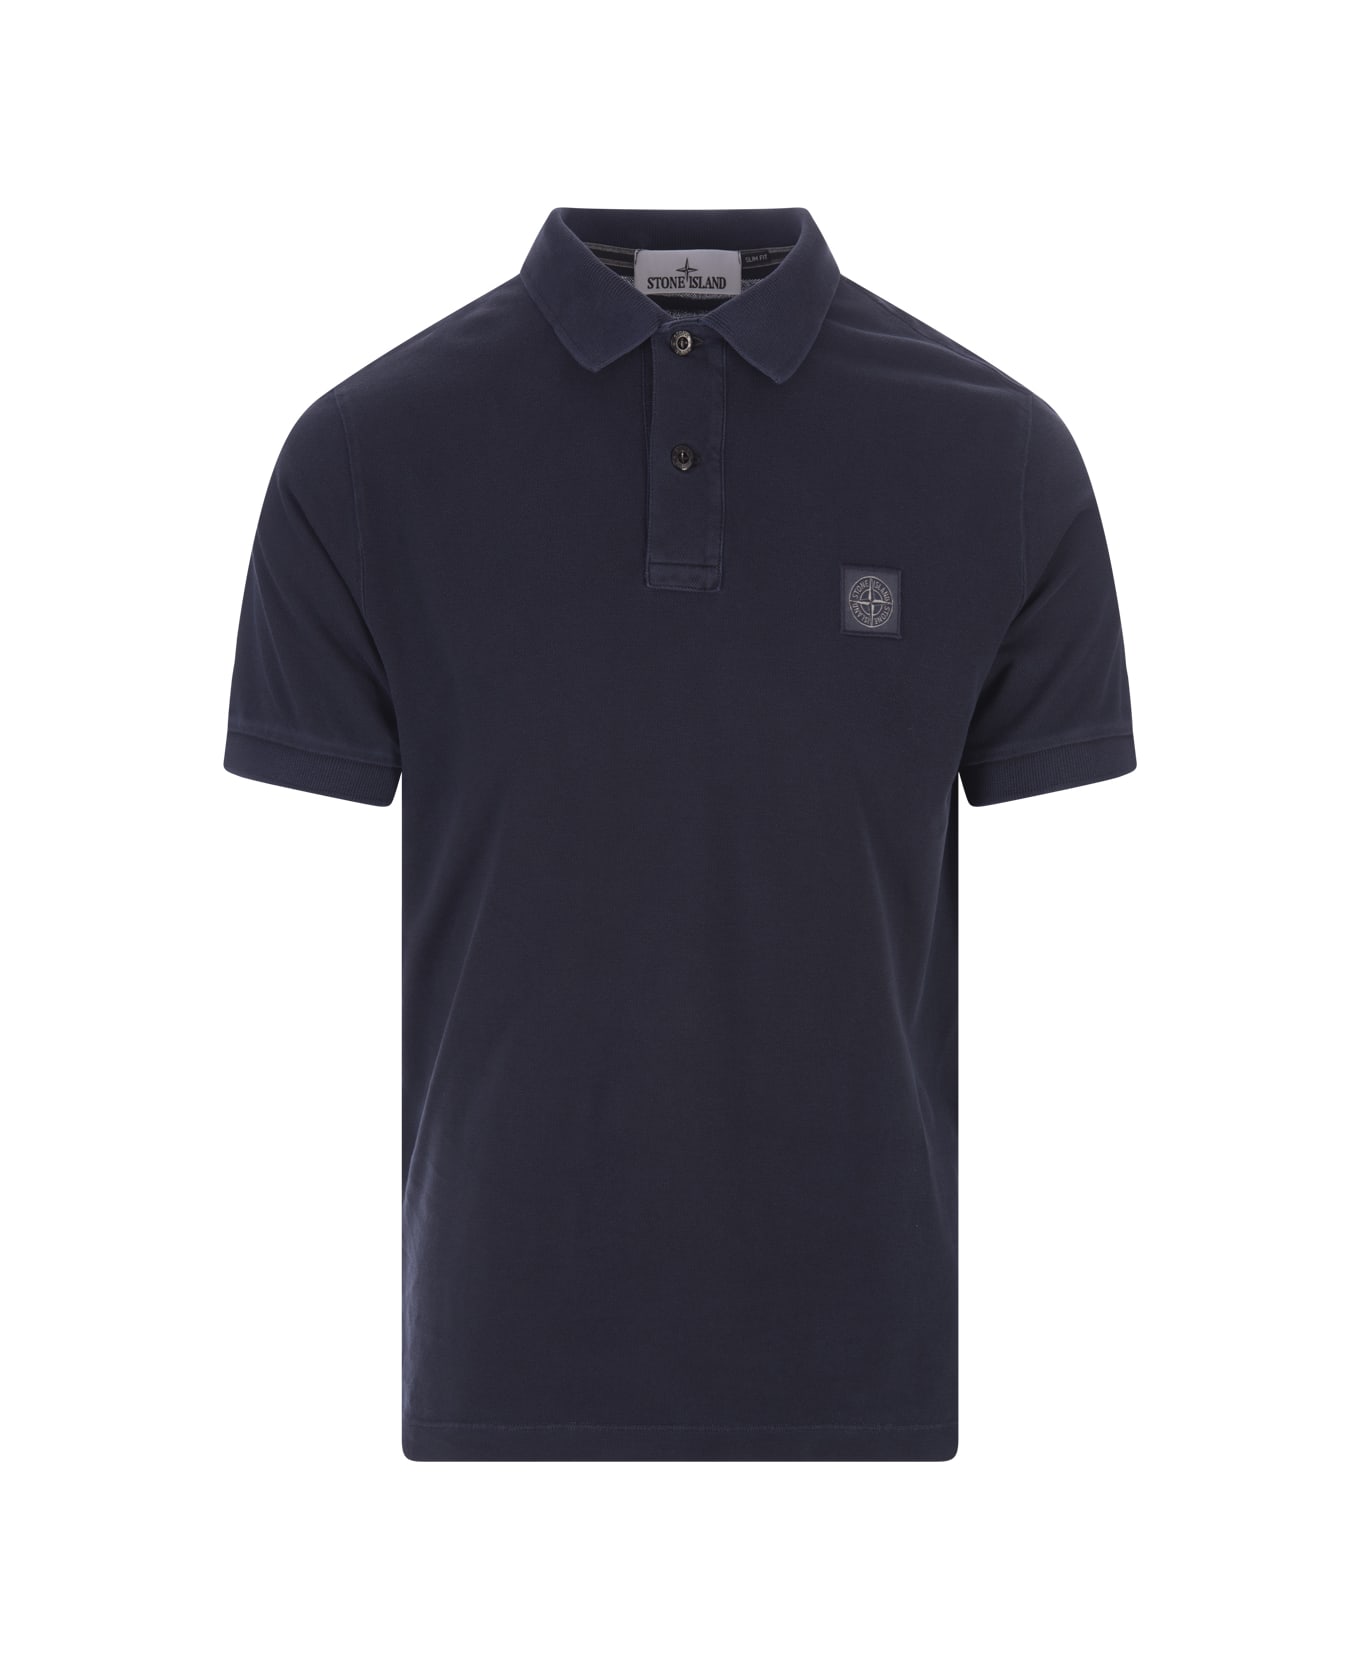 Stone Island Navy Blue Pigment Dyed Slim Fit Polo Shirt - Blue ポロシャツ